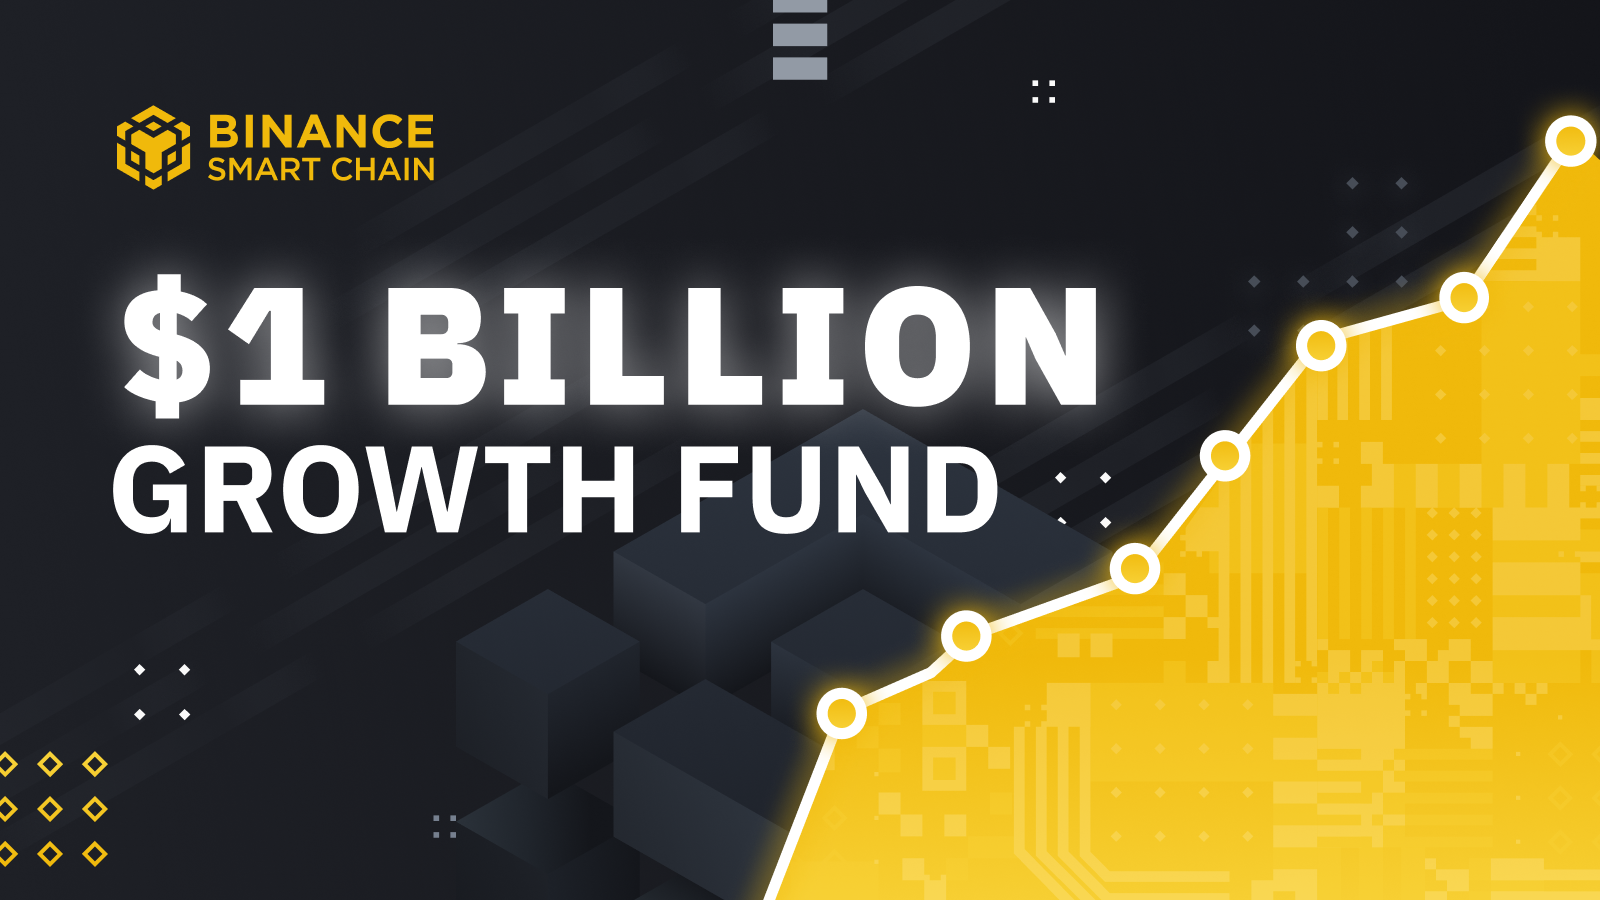 Binance Smart Chain (BSC) Receives $1 Billion to Bring the Next 1 Billion Crypto Users